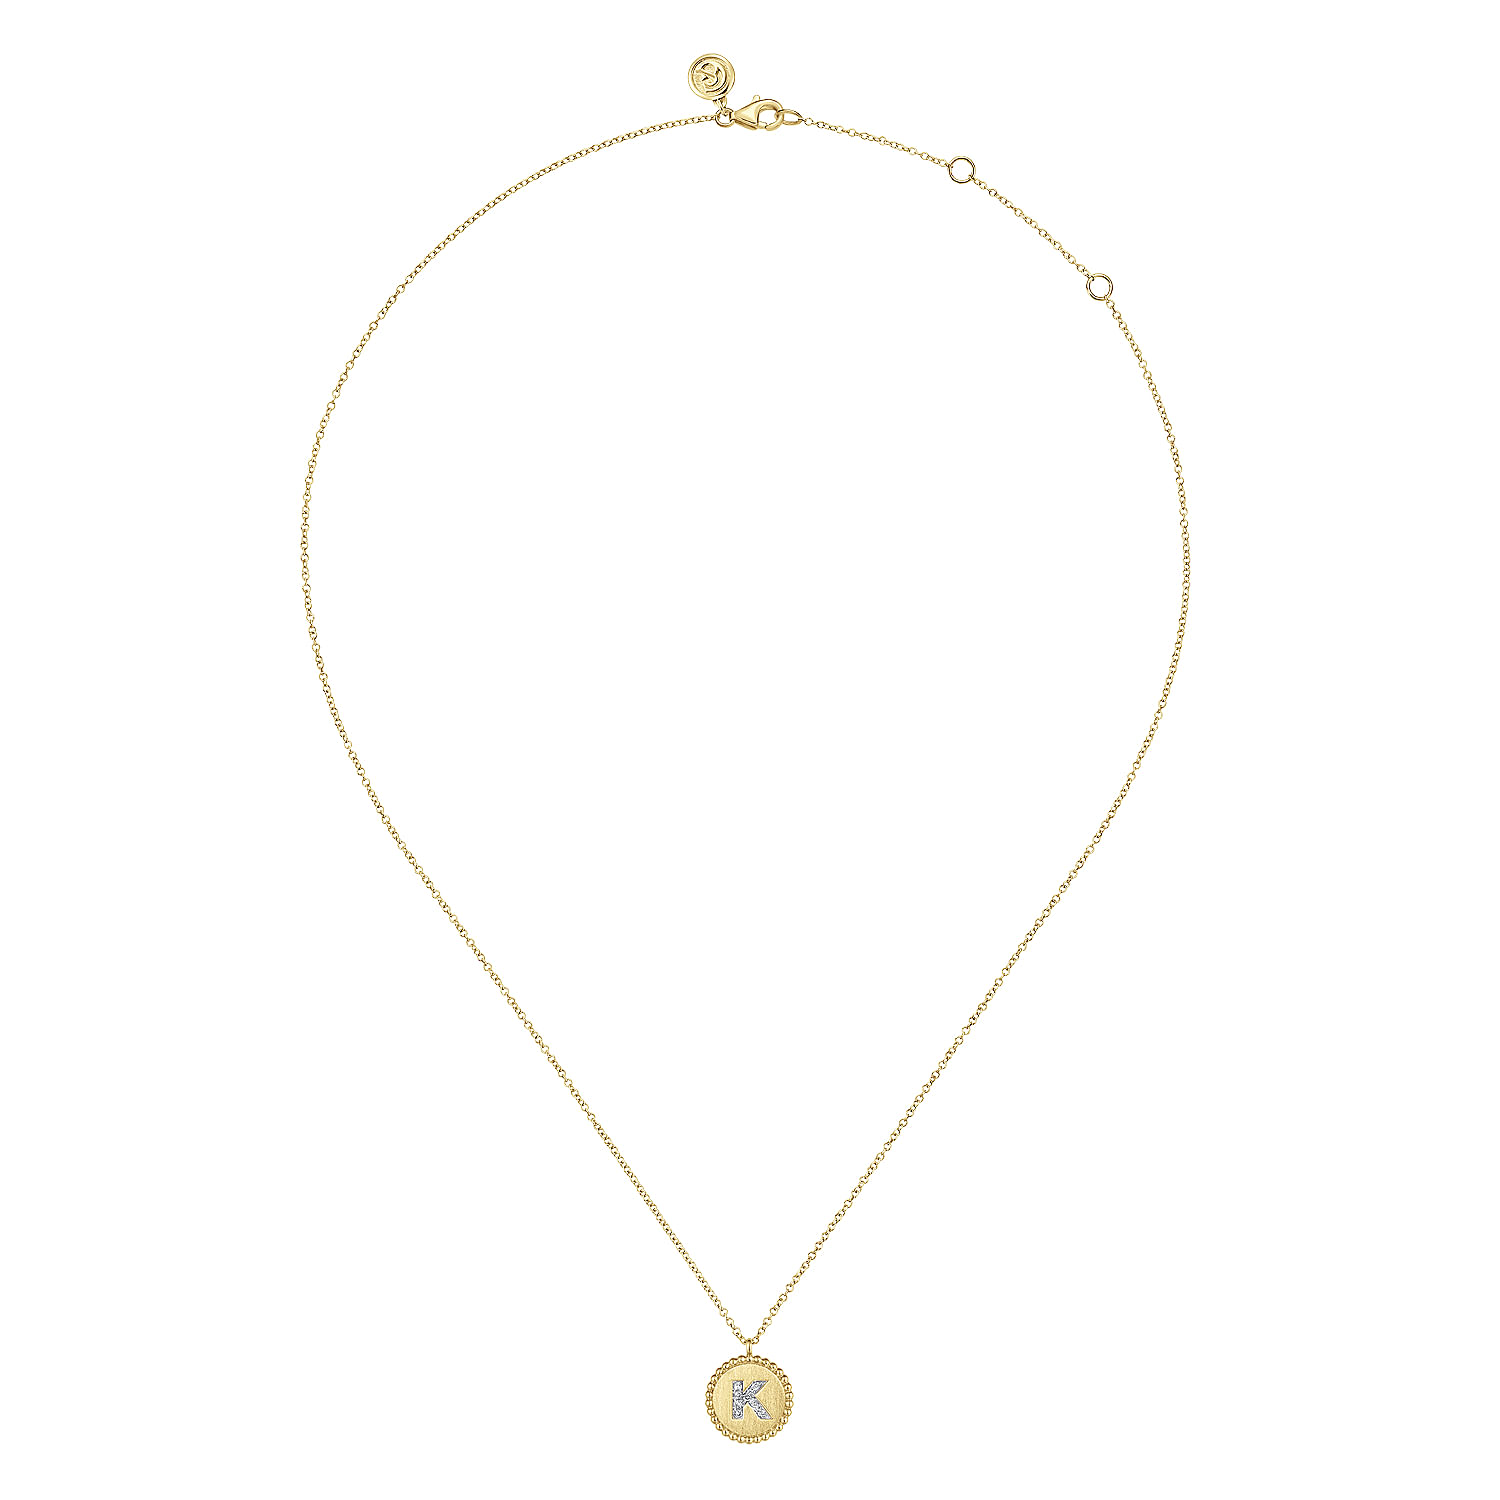 14K Yellow Gold Round K Initial Pendant Necklace with Diamonds